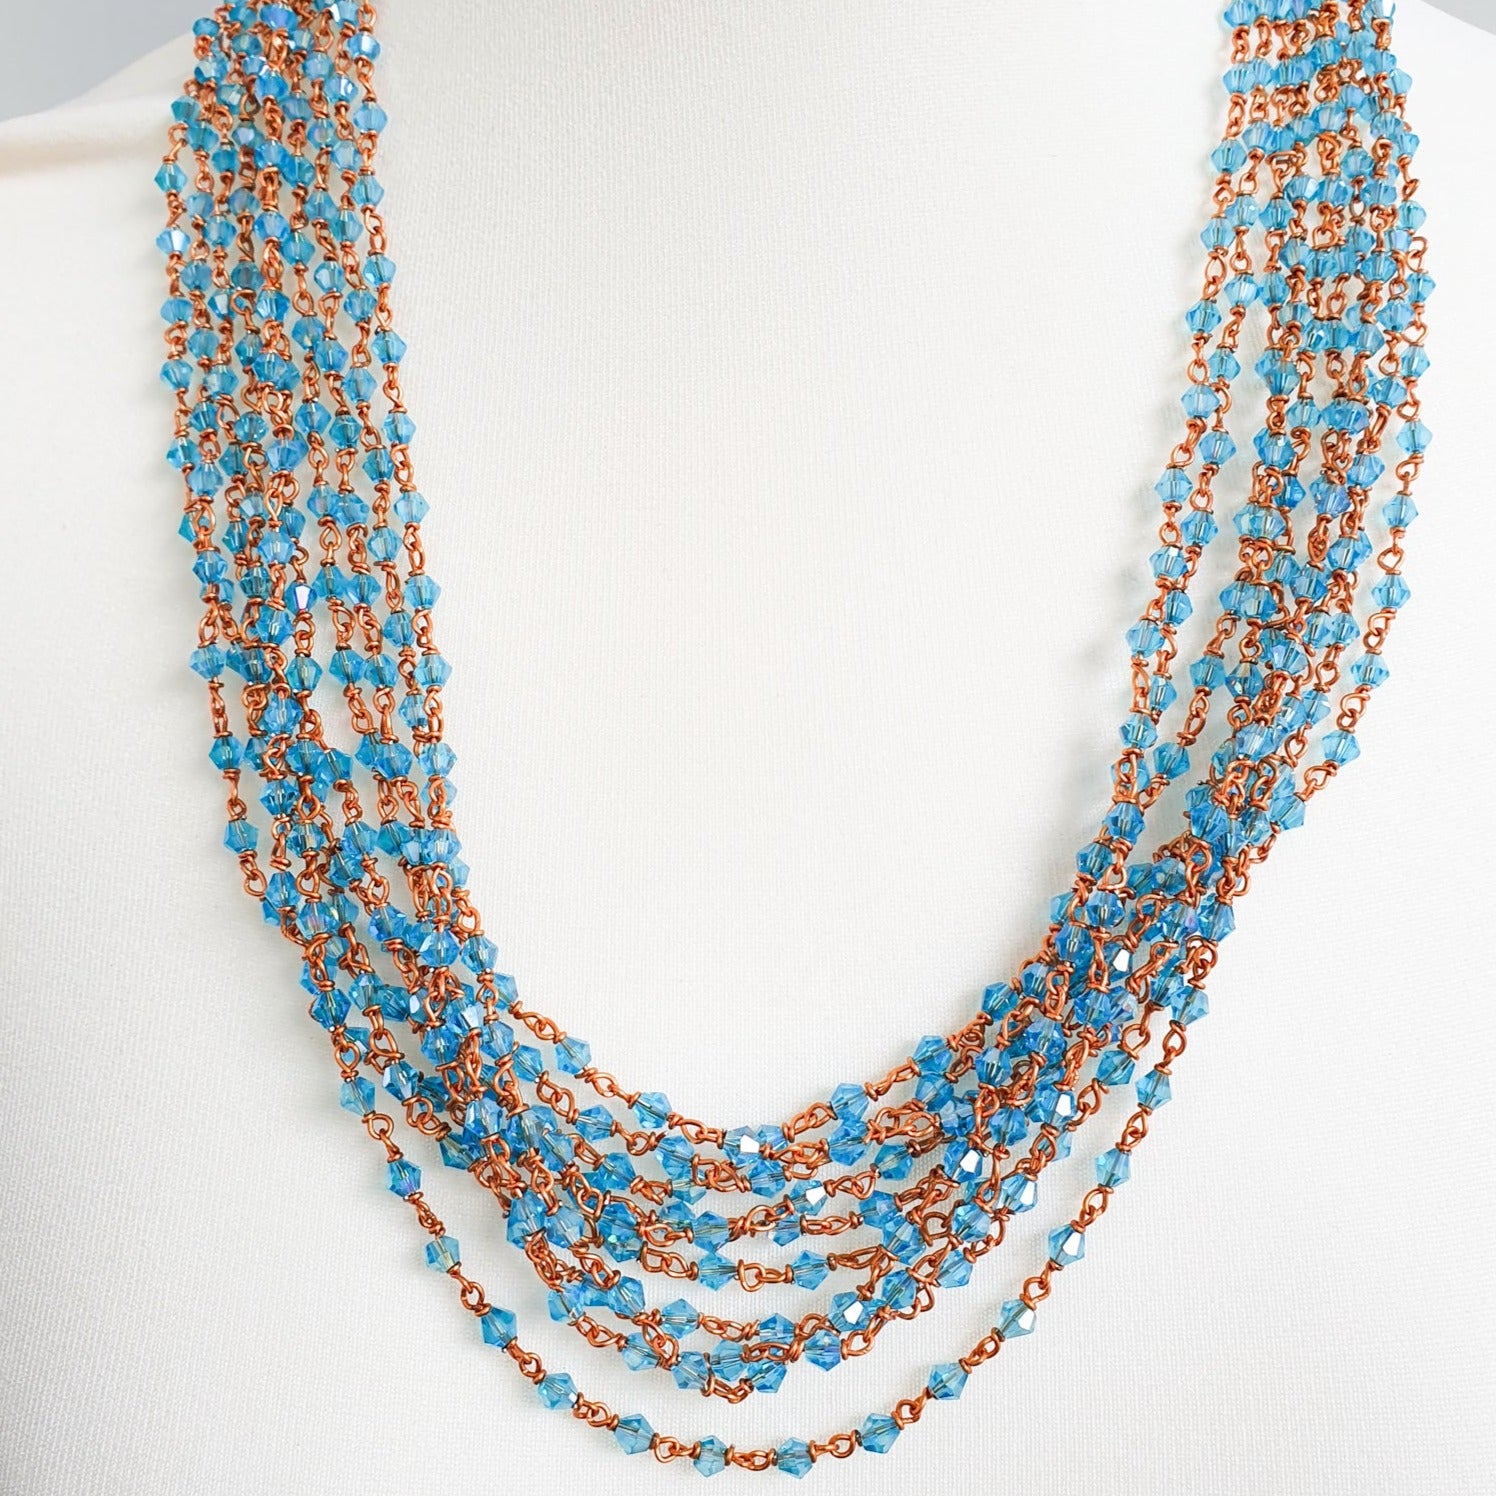 Handmade Glass Beaded Necklace With Copper Wire, Light Blue Beads